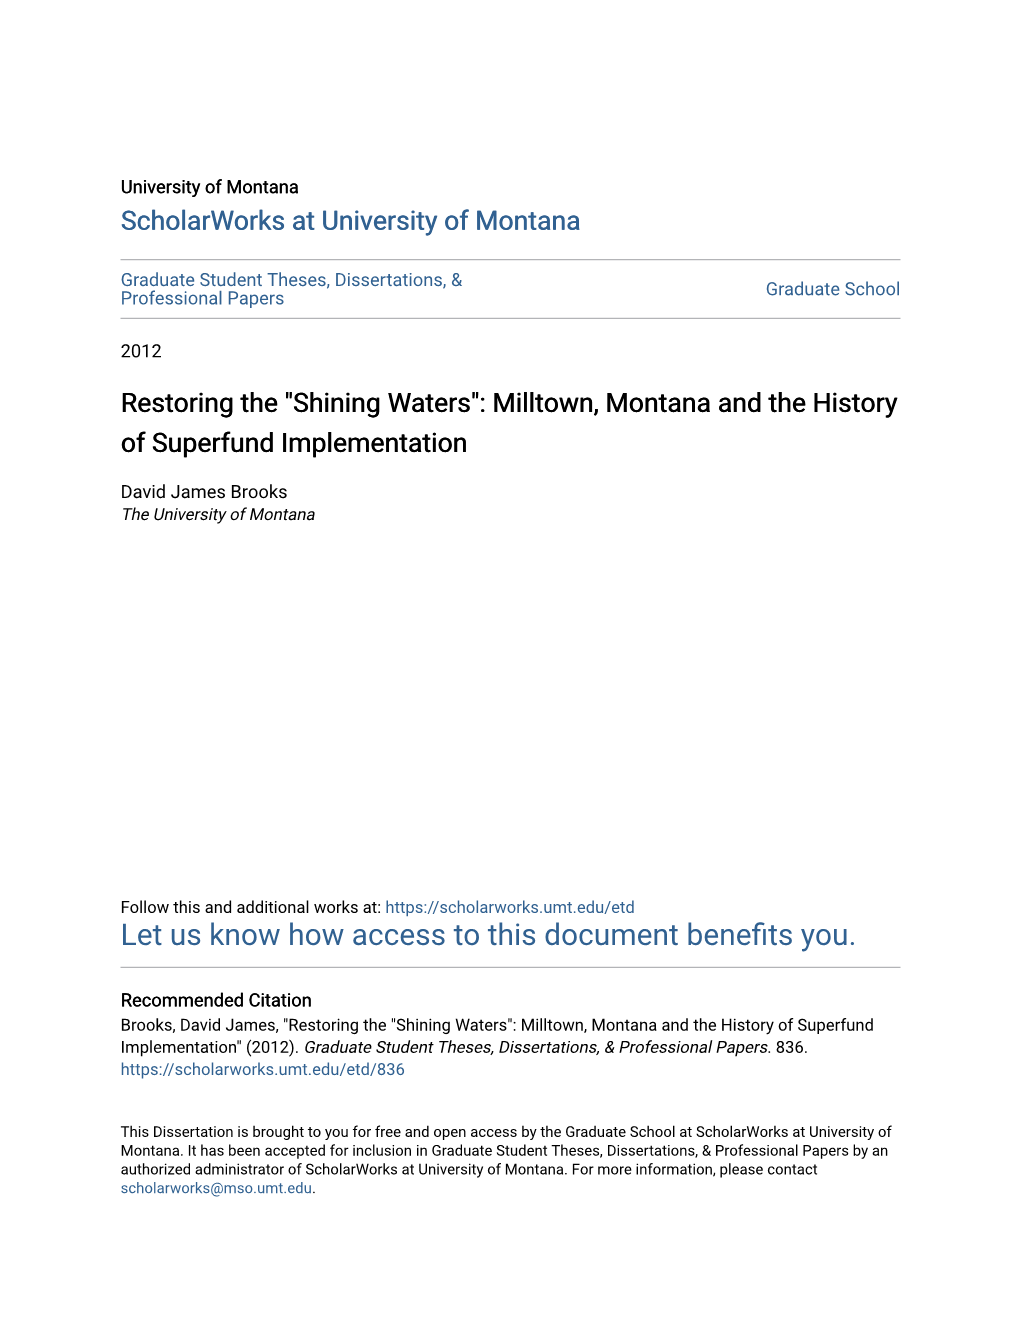 Milltown, Montana and the History of Superfund Implementation